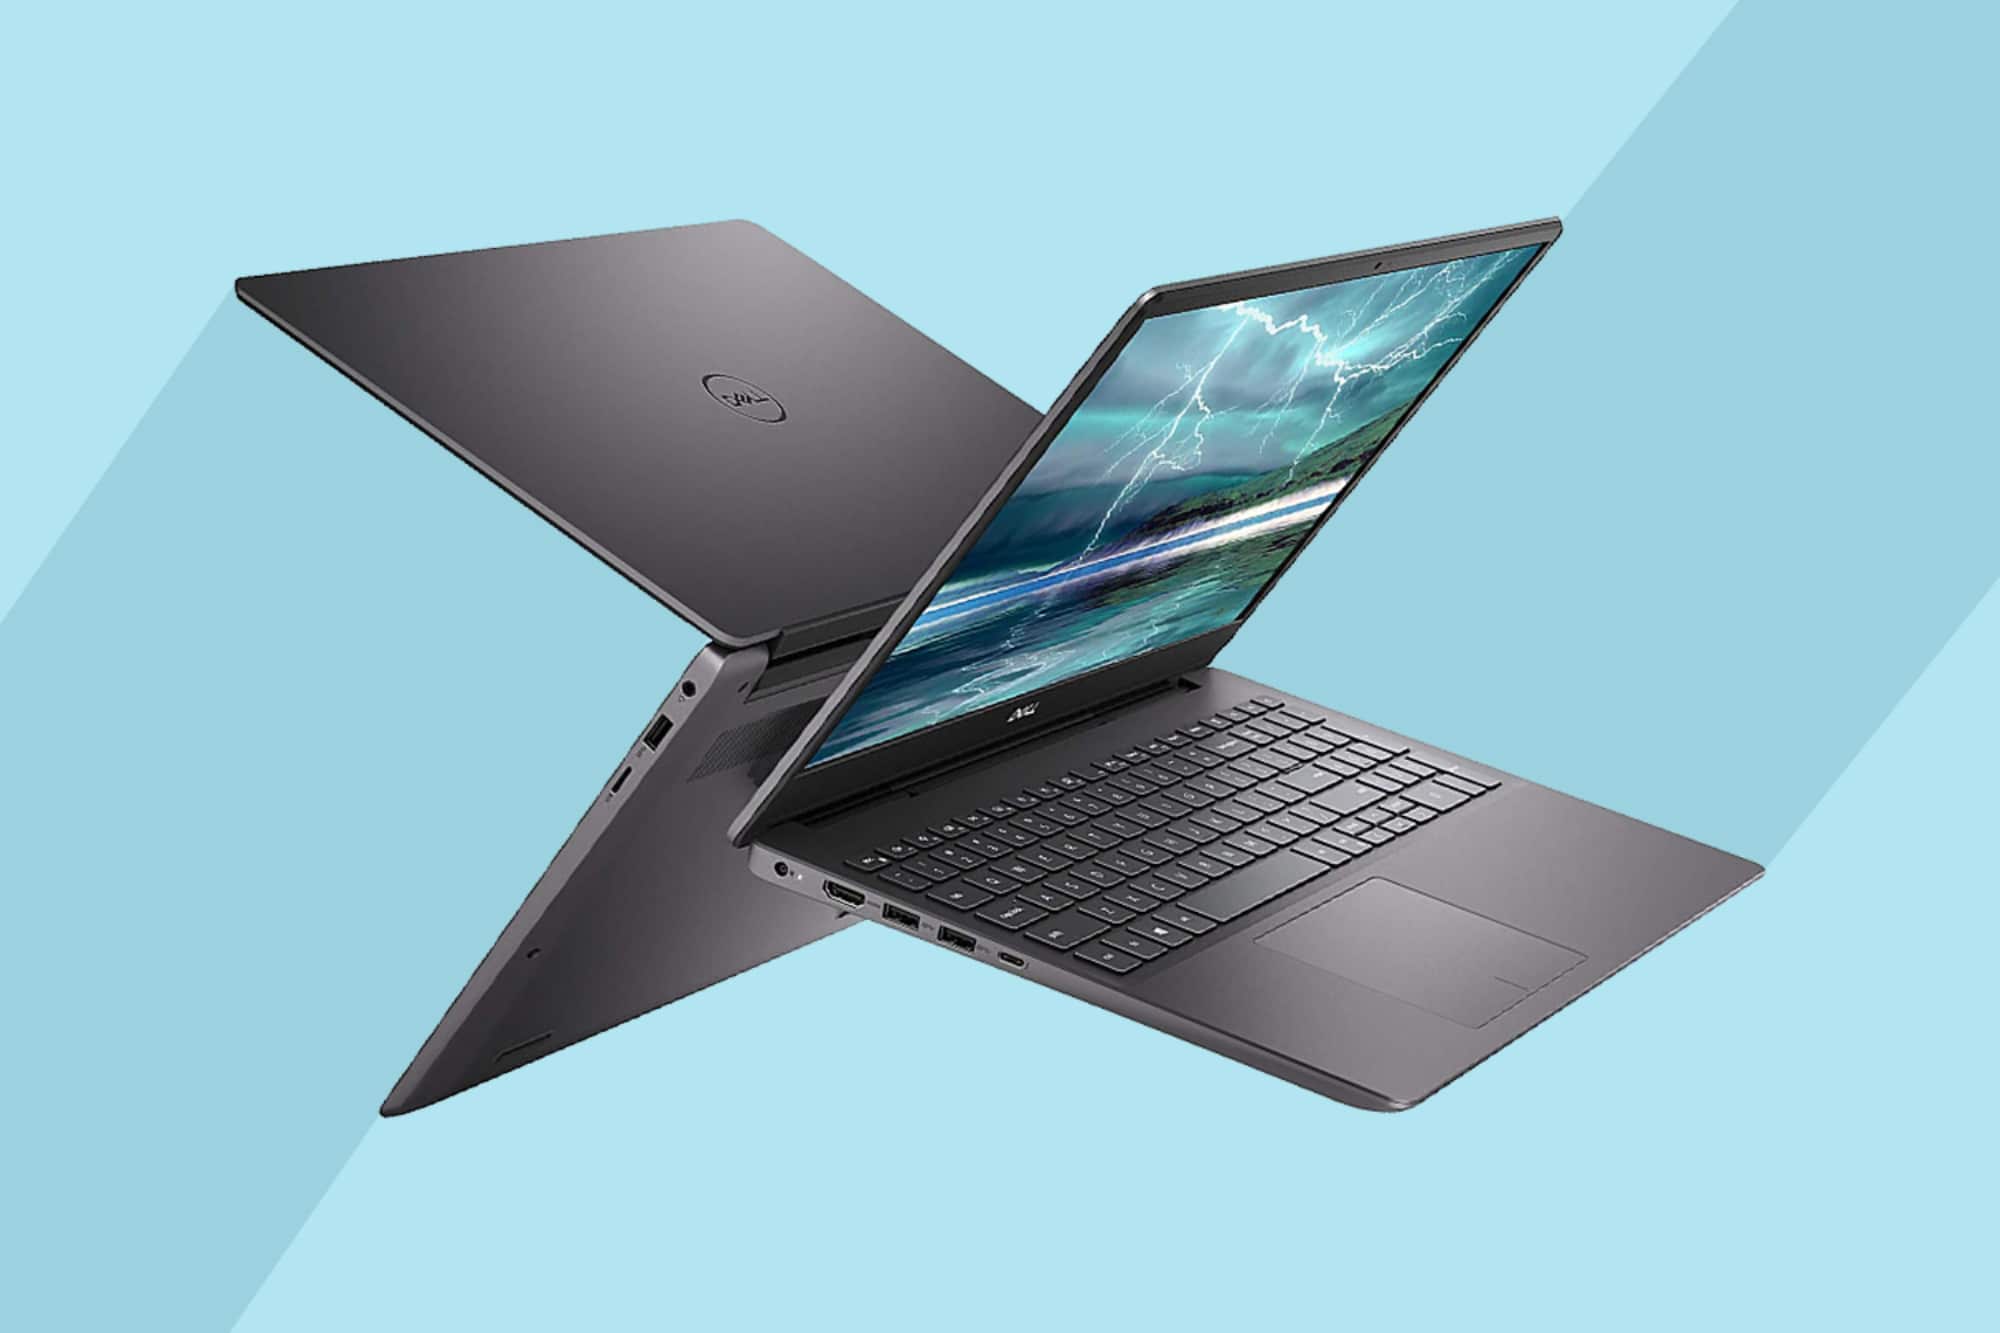 This is the cover photo for our Best Laptops for College Students article. It features two Dell XPS 13 laptops, back to back, hoving in limbo with a blue background with stripes.